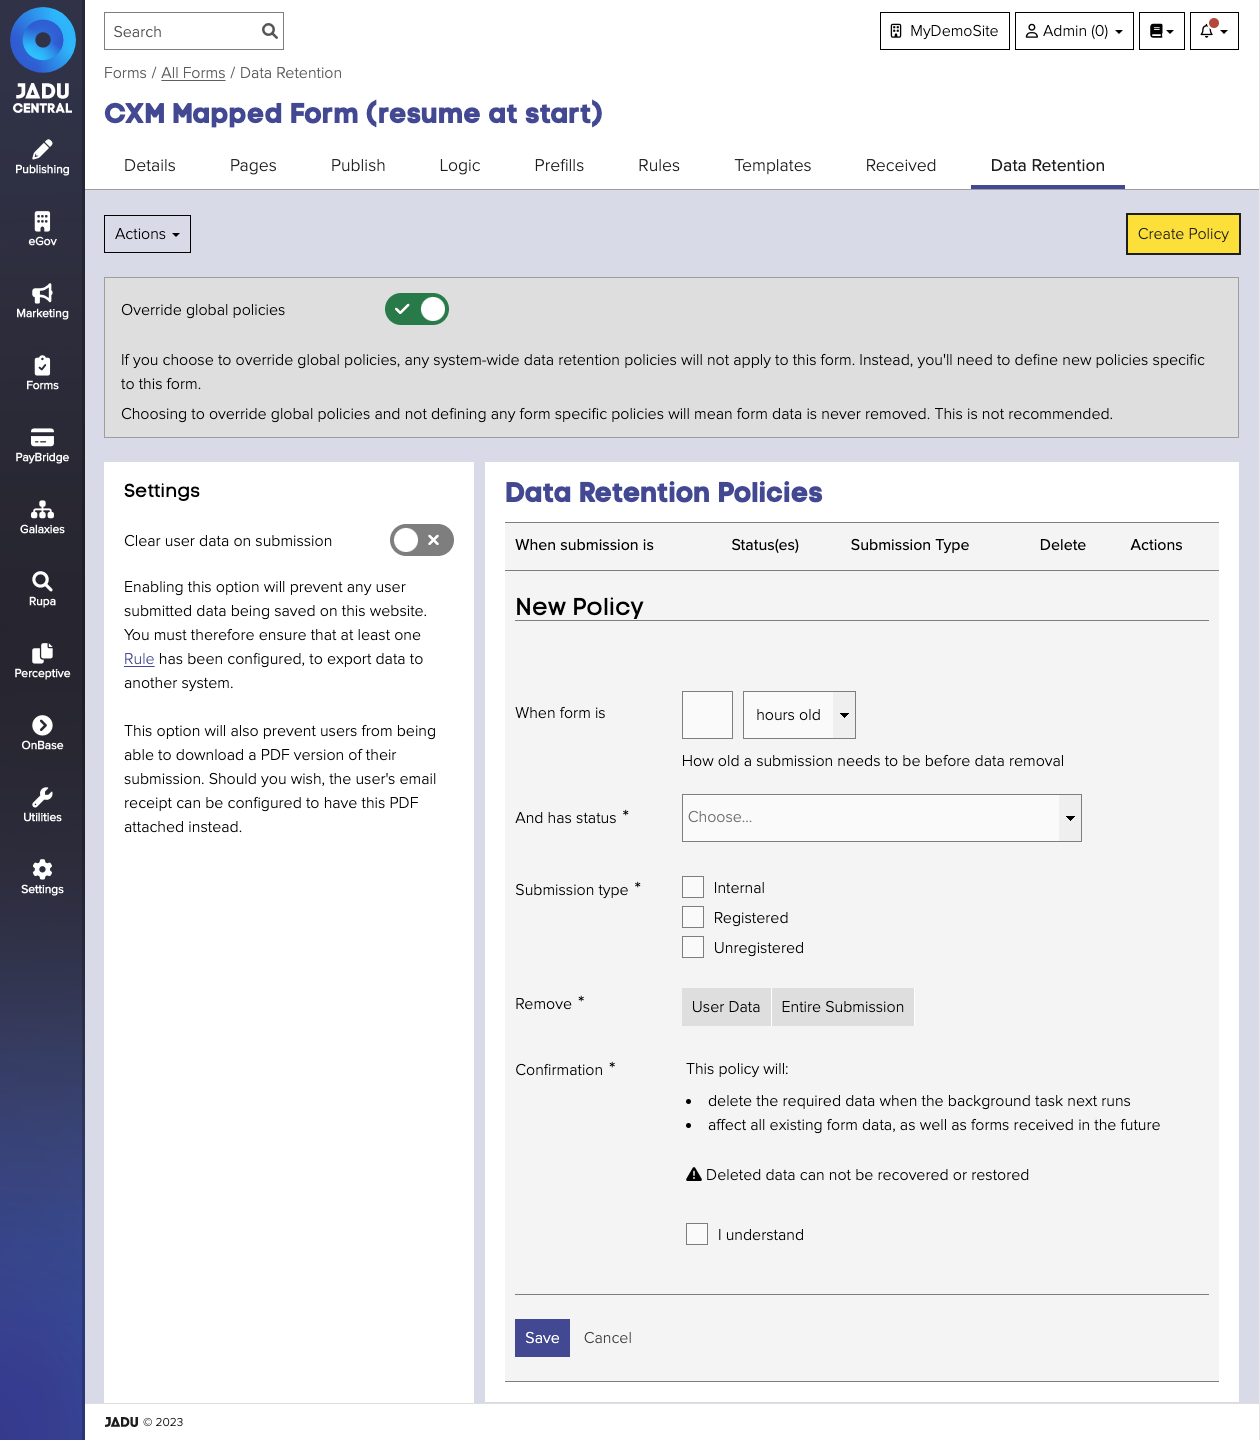 Form-specific policies interface